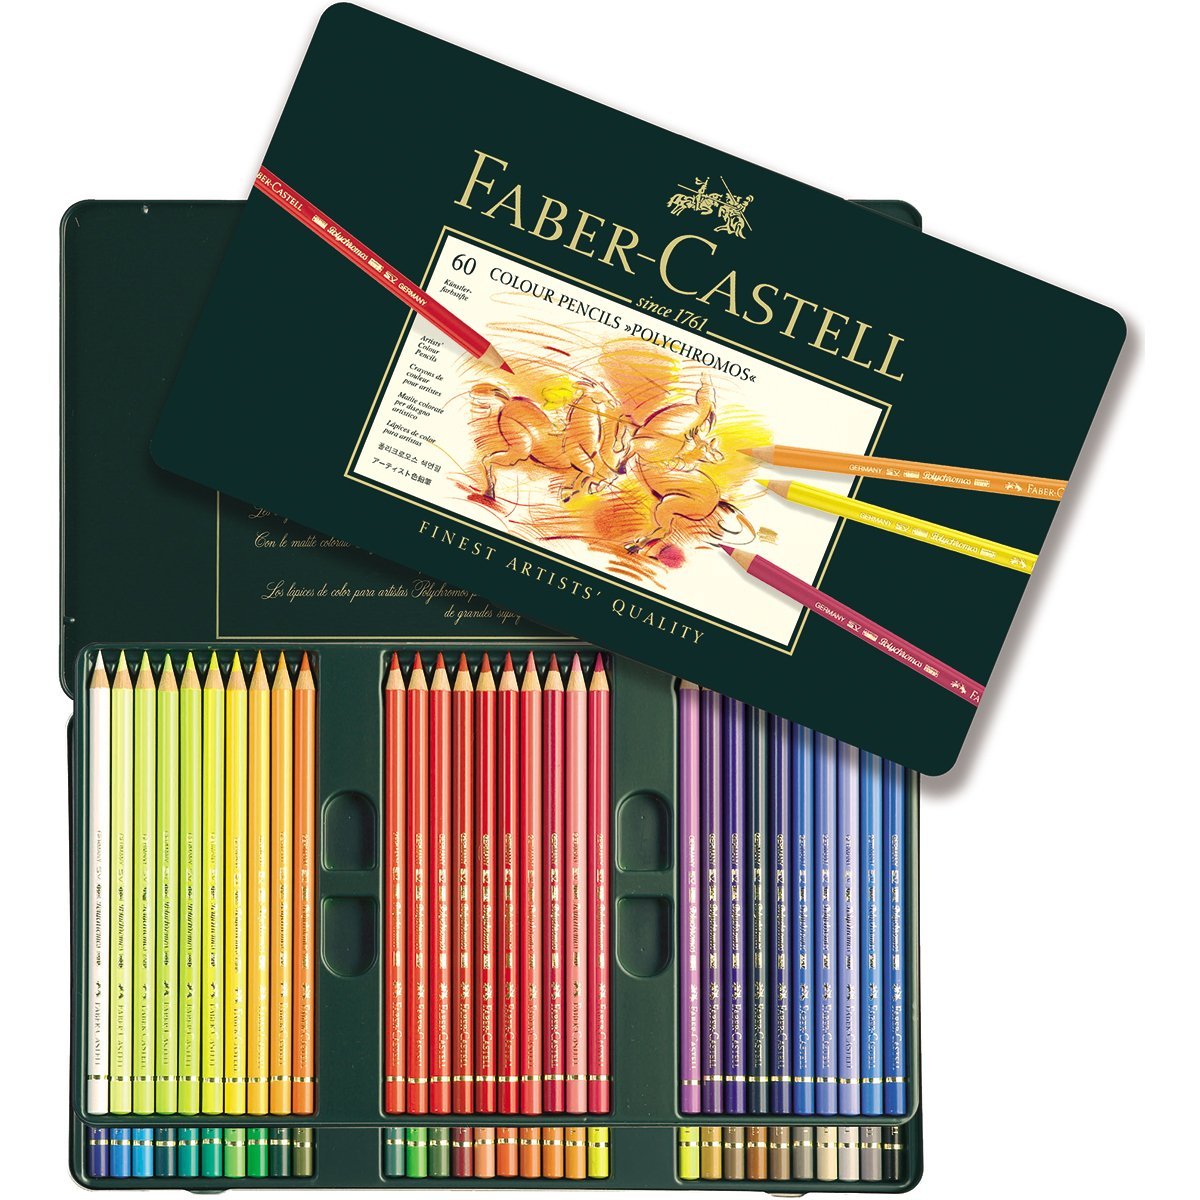 top quality colored pencils, high quality pencils, artist must haves